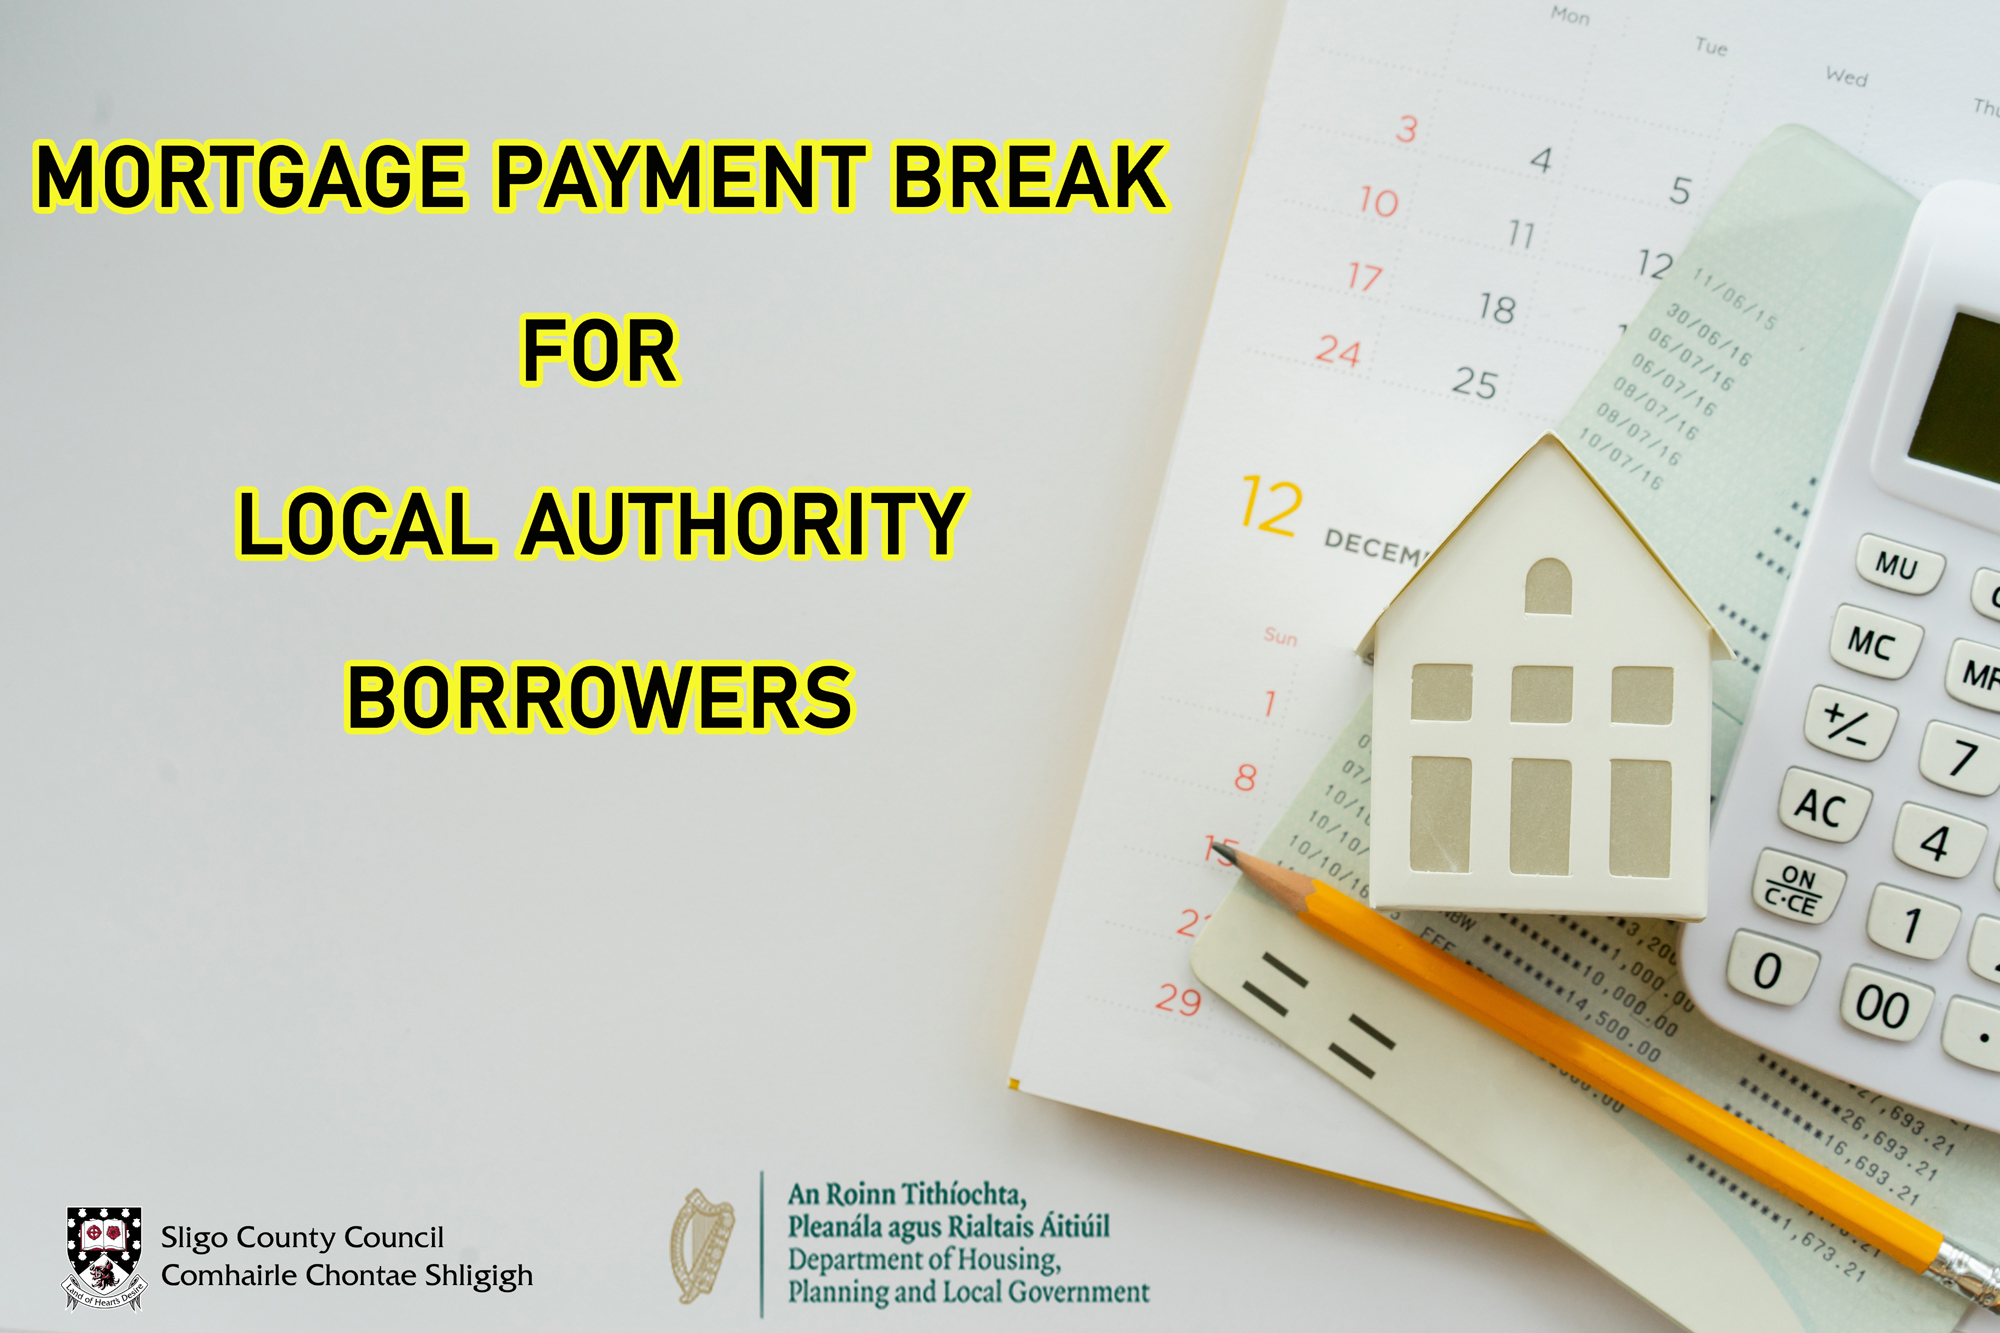 Mortgage Payment Break for local authority borrowers